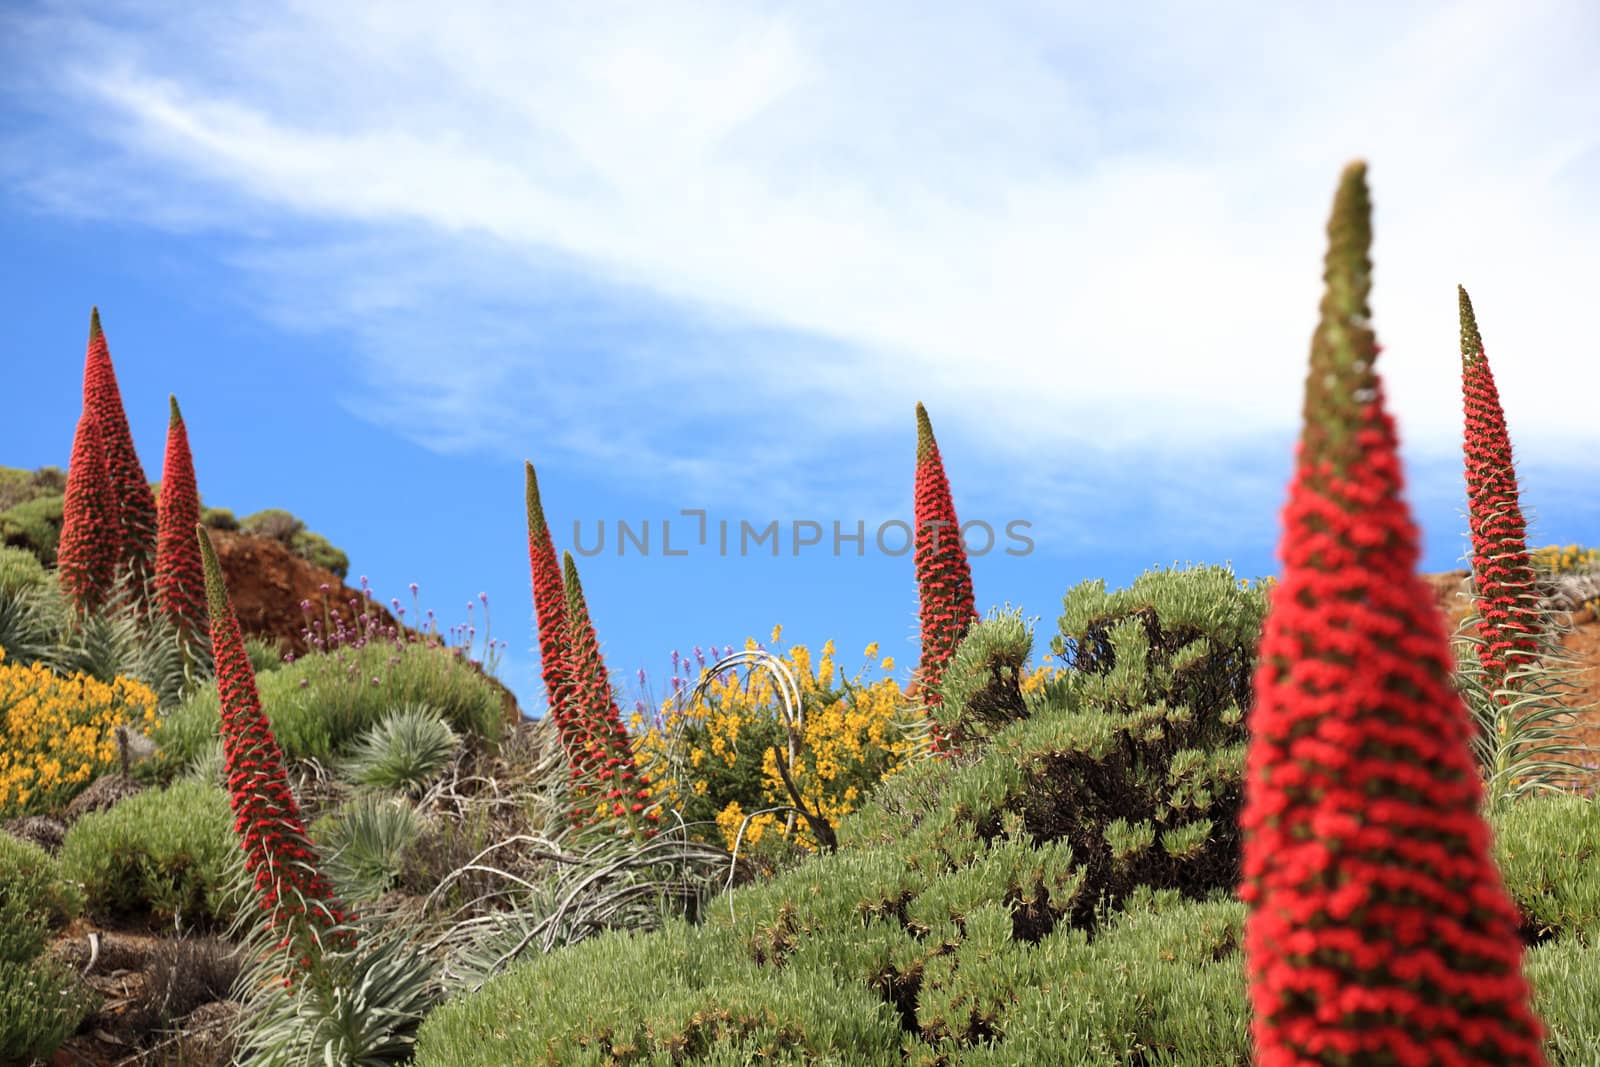 Tenerife landscape with plant Echium wildpretii also know as tower of jewels, red bugloss, Tenerife bugloss or Mount Teide bugloss. Image from Teide national park, Canary Islands, Spain.